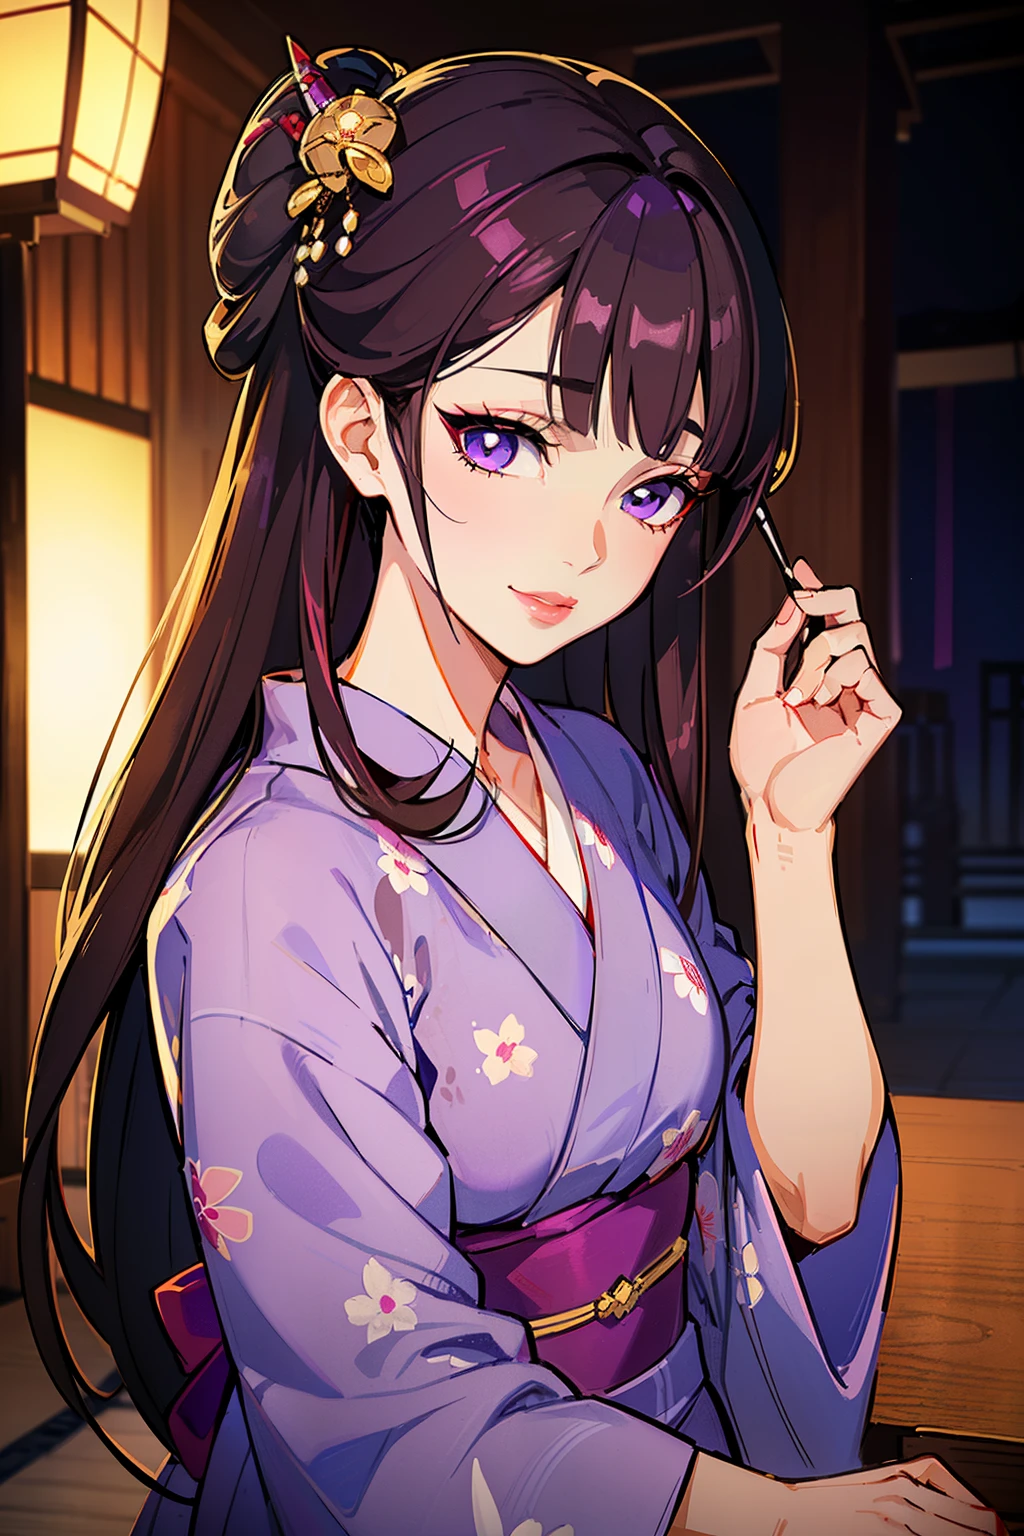 (high-quality, breathtaking),(expressive eyes, perfect face) (((yukata, sexy lips)), 1girl, female, solo, young adult, dark brown hair, purple coloured eyes, stylised hair, gentle smile, long length hair, loose hair, side bangs, tied up, japanese clothing, elegant, soft make up, hair pin accessory in hair, demon slayer art style